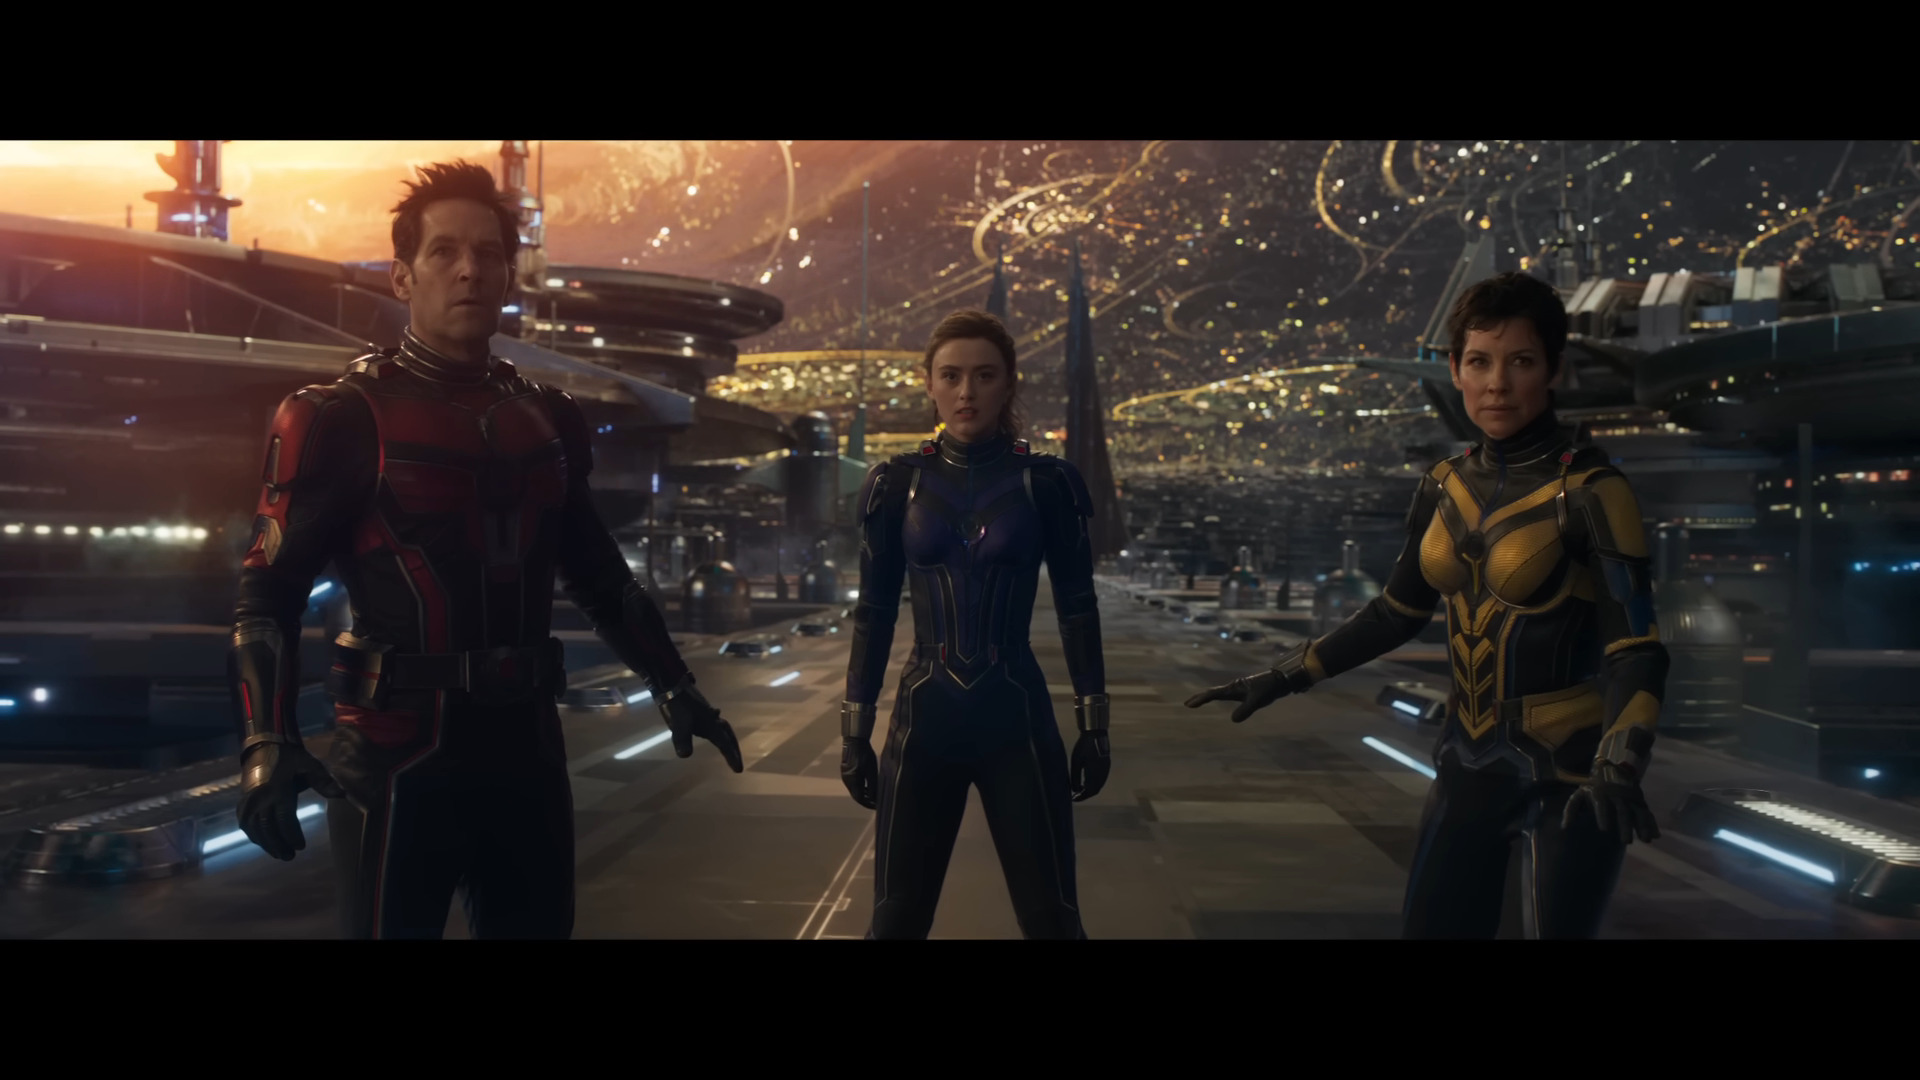 Scott Lang (Paul Rudd), Cassie Lang (Kathryn Newton), and Hope Van Dyne (Evangeline Lilly) run into trouble in the Microverse in Ant-Man and the Wasp: Quantumania (2023), Marvel Entertainment via YouTube